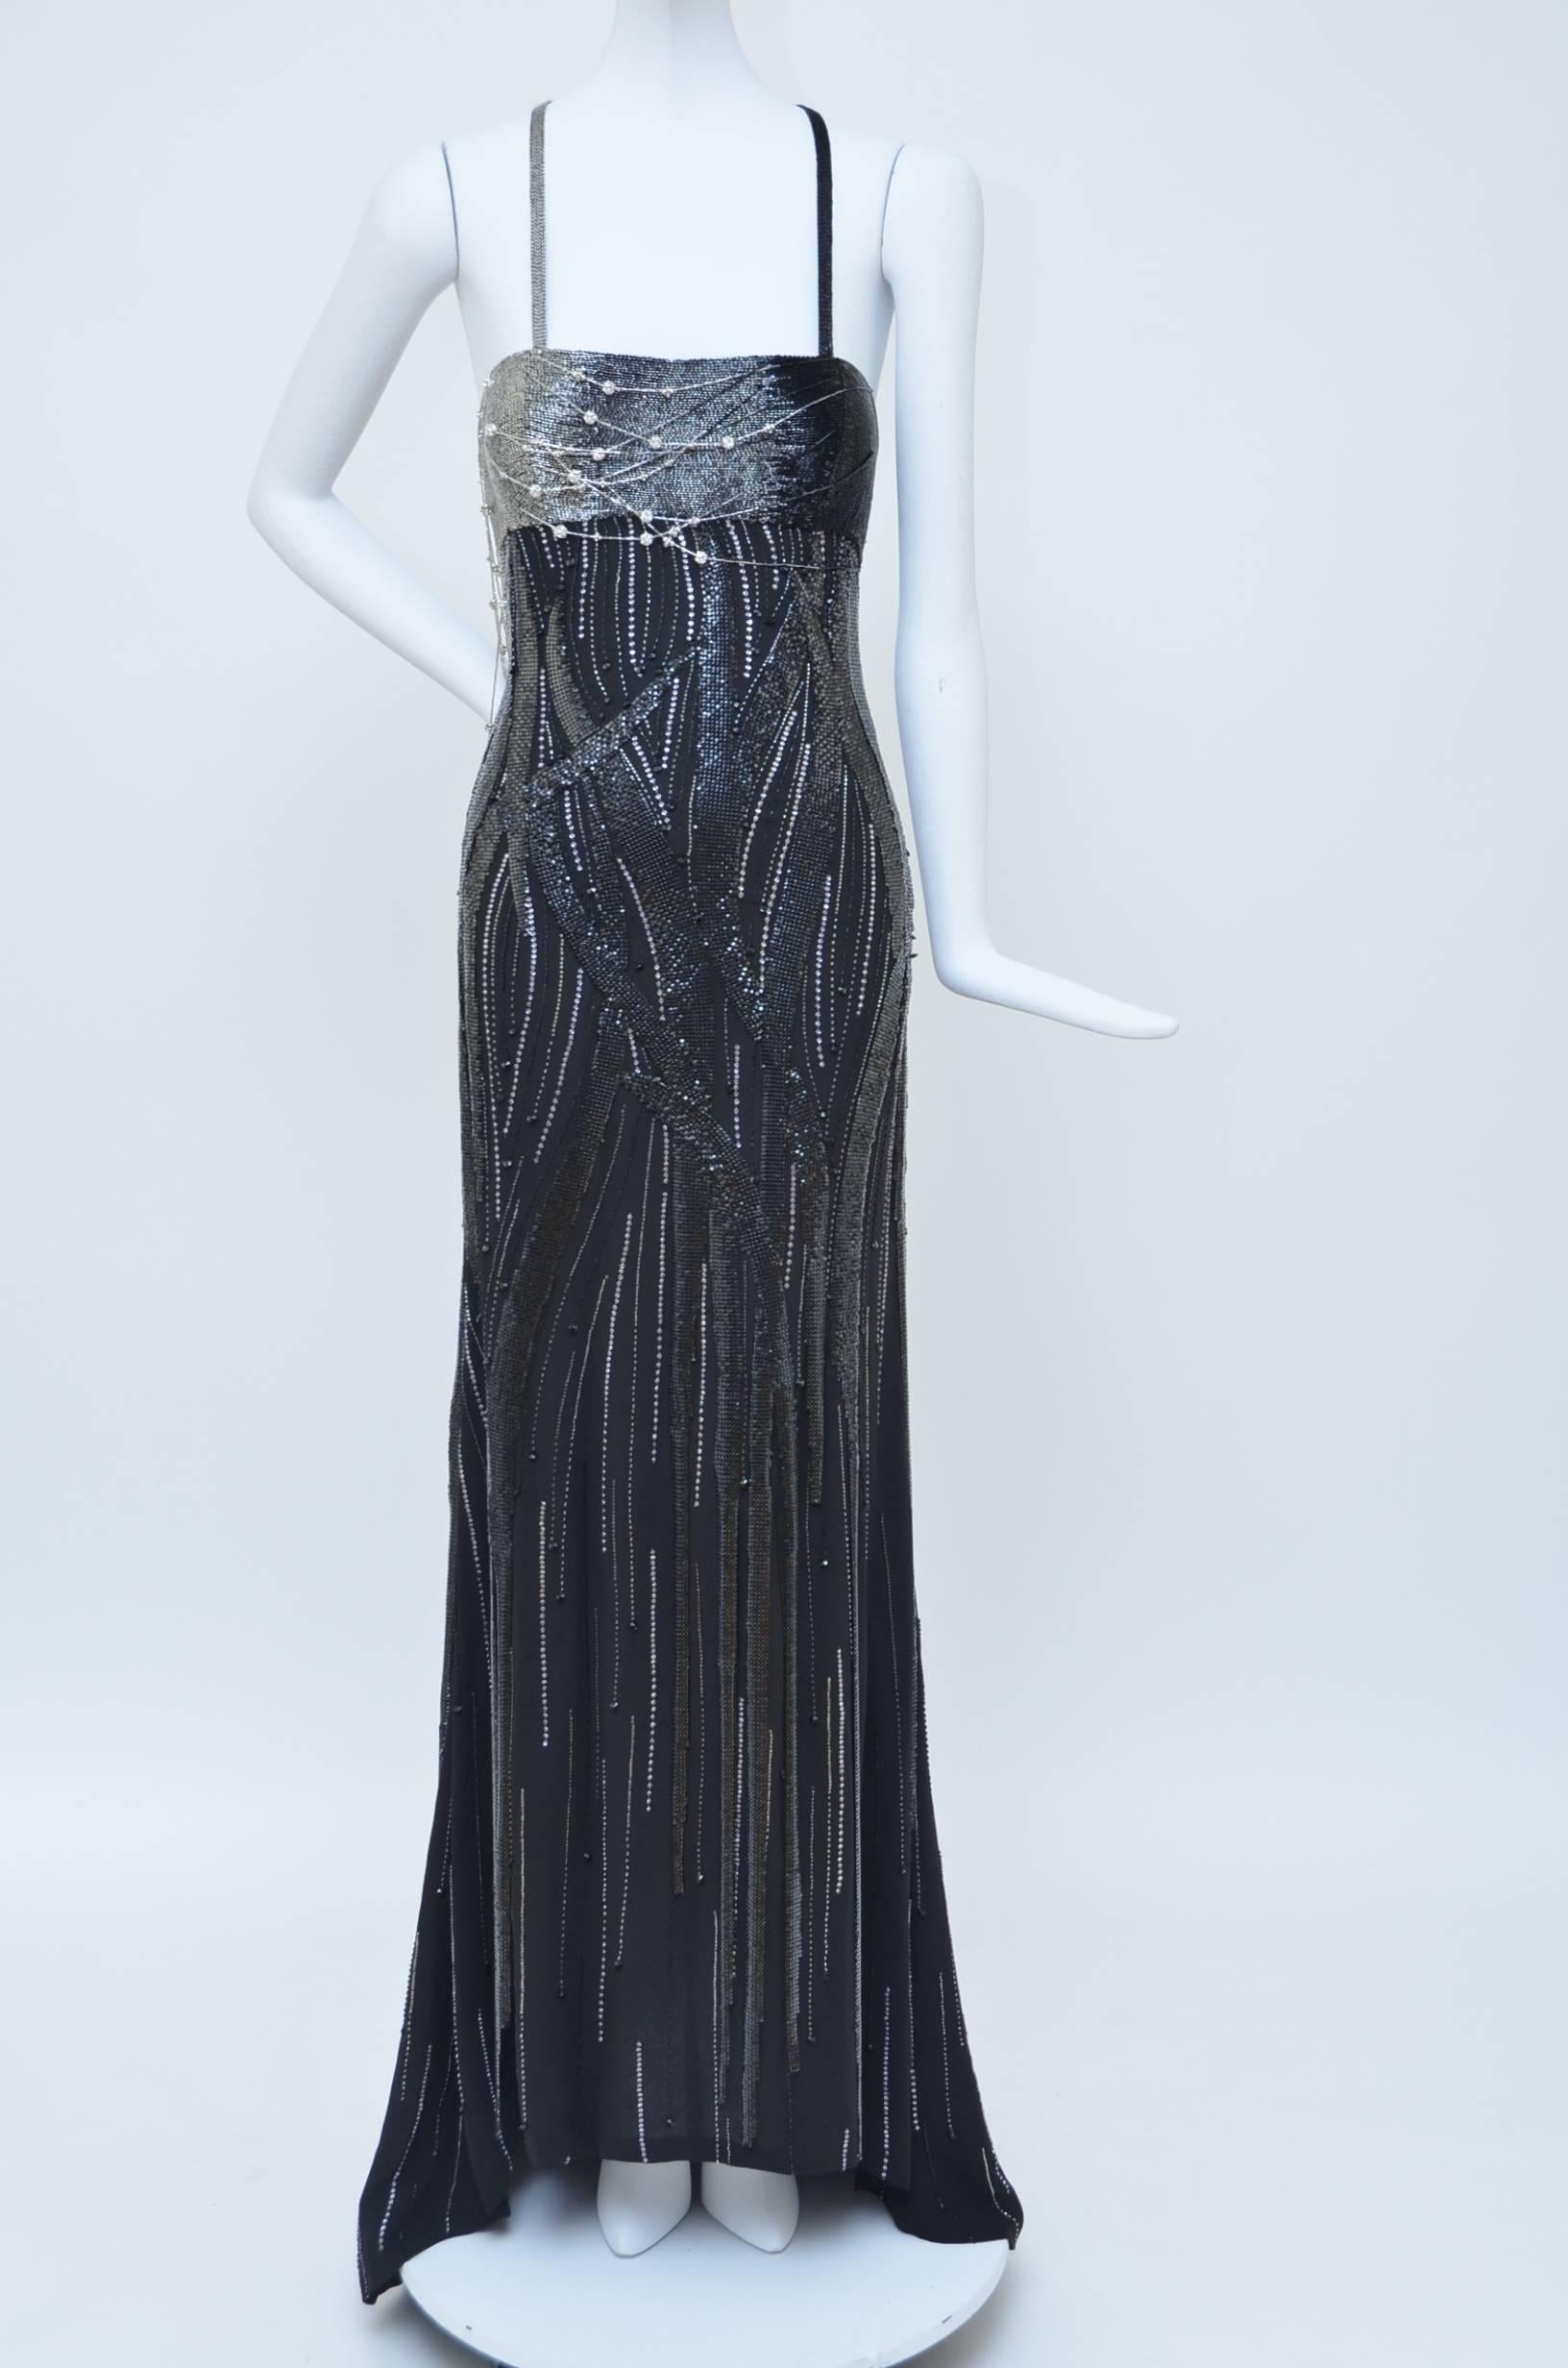 Very extravagant black silk  Gianni Versace Couture Atelier Dress from 1990's.
Amazing construction with Oroton chain mail sewn all over the dress and 